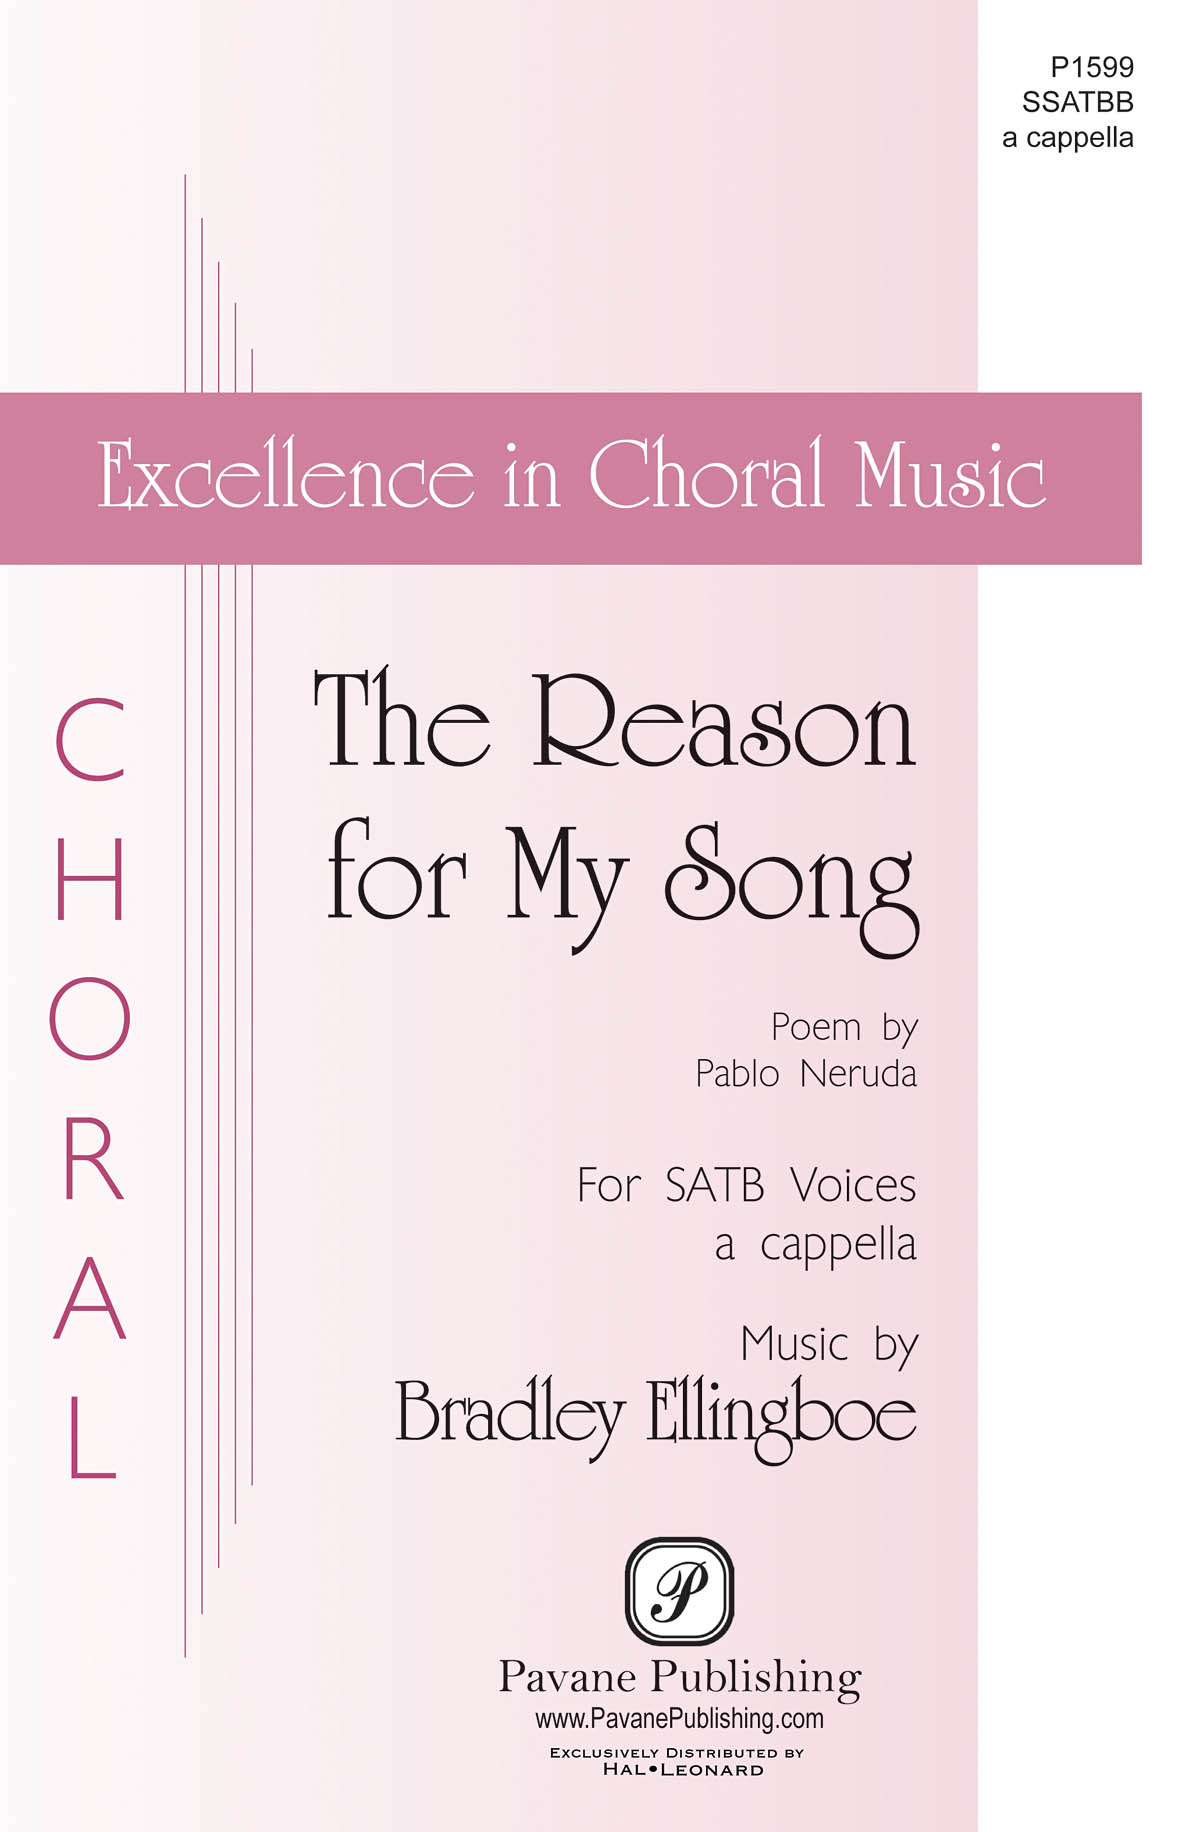 Bradley Ellingboe: The Reason for My Song: Mixed Choir a Cappella: Vocal Score